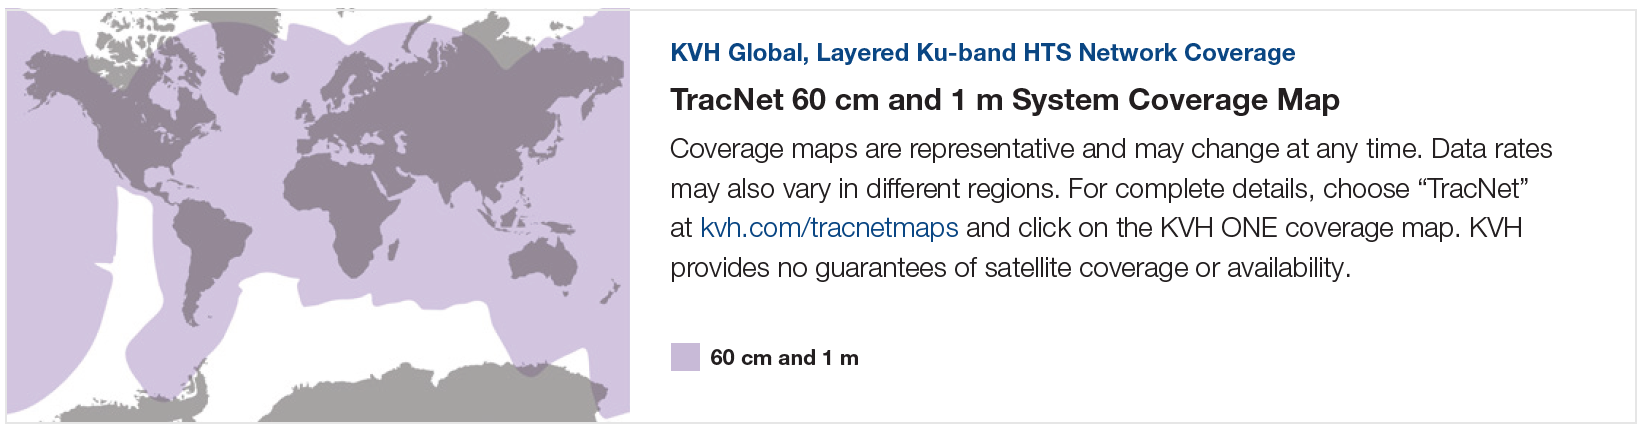 coverage map h60